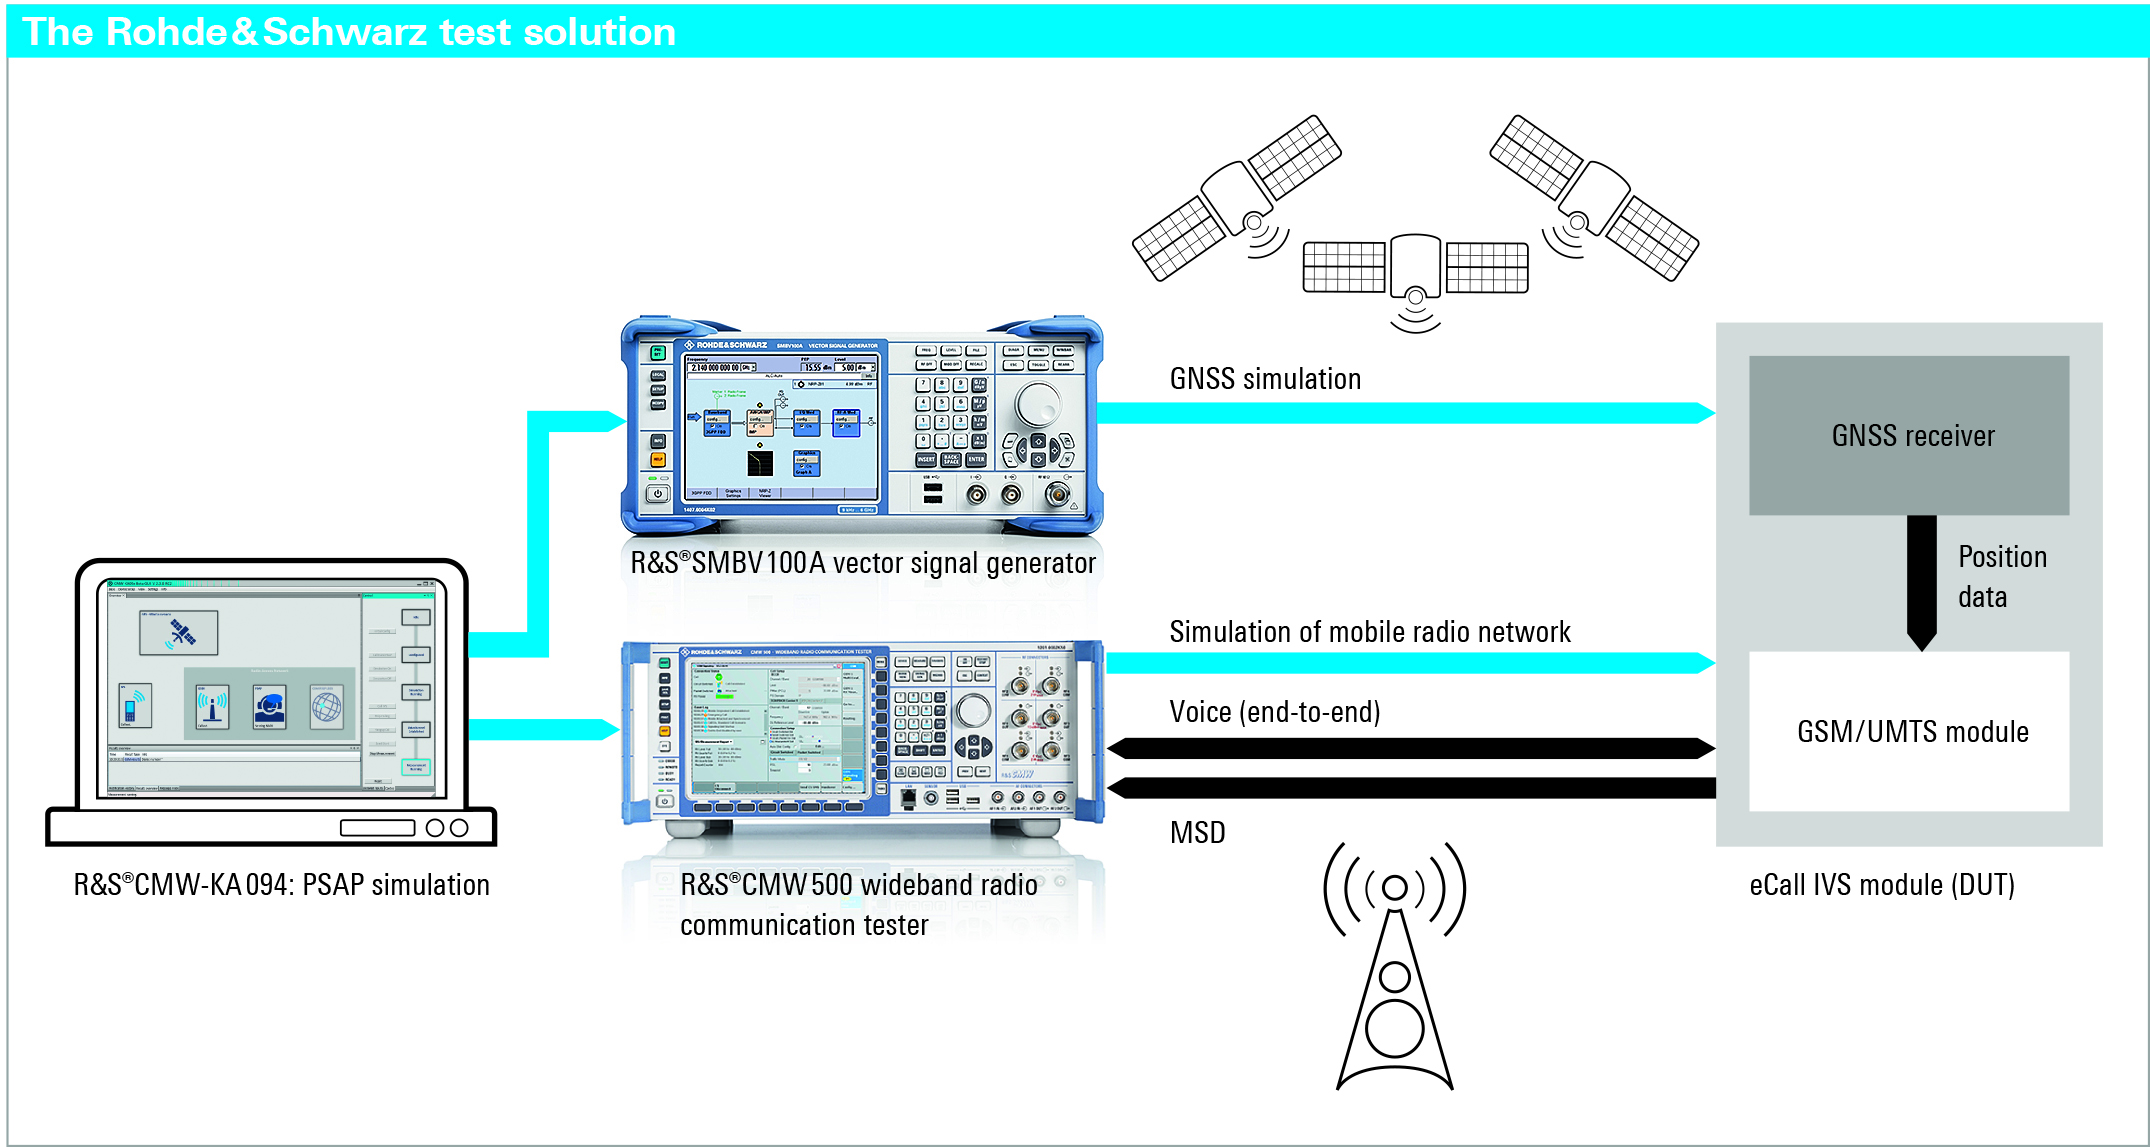 Figure 2 - The test system consists of an R&S CMW500 wideband radio communication tester for the network simulation, an R&S SMBV100A vector ­signal generator for the GNSS simulation and PC application software.